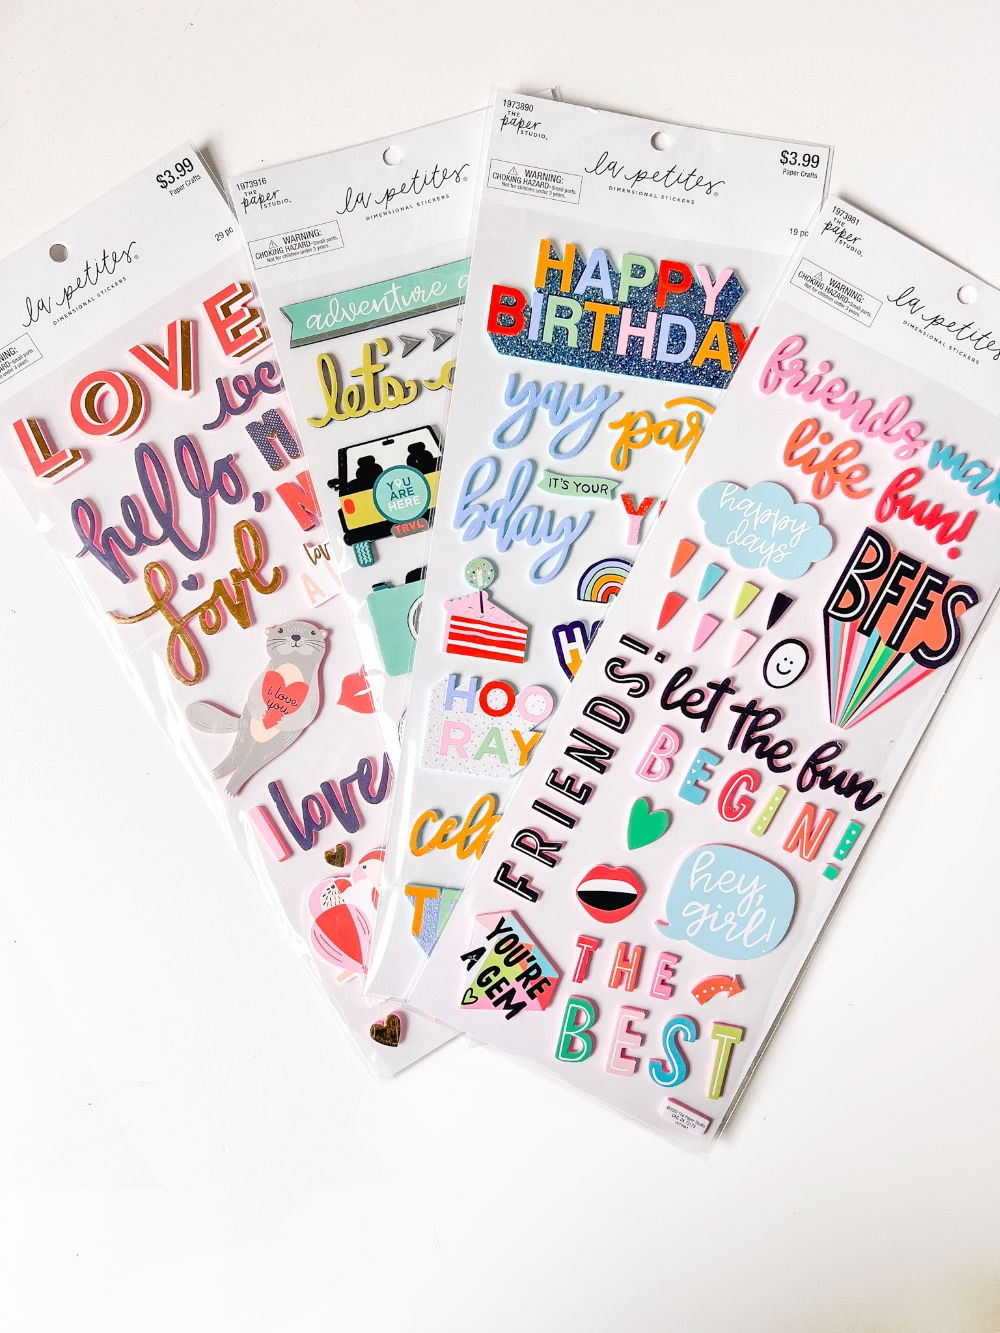 Easy 5-Minute Gift Tags - brighten someone's day with this idea!